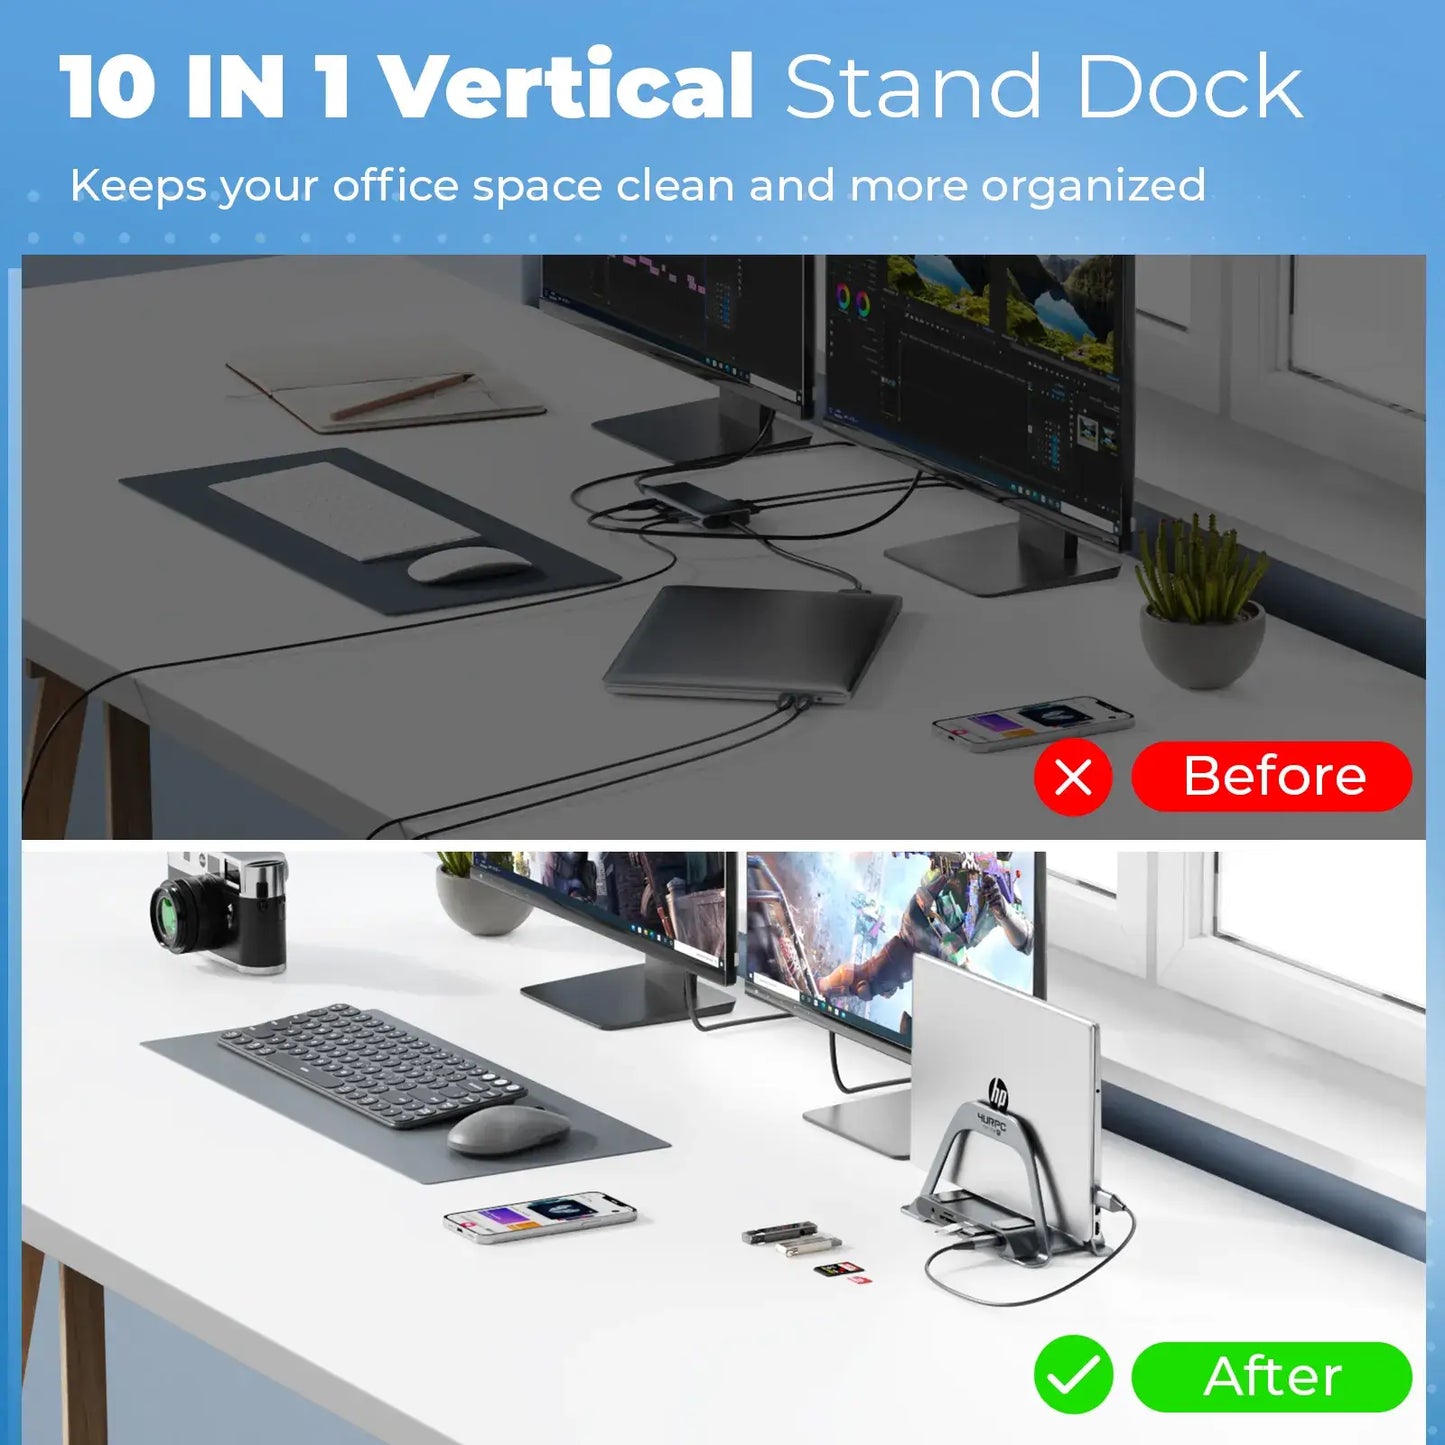 10 in 1 vertical stand dock organized your desk